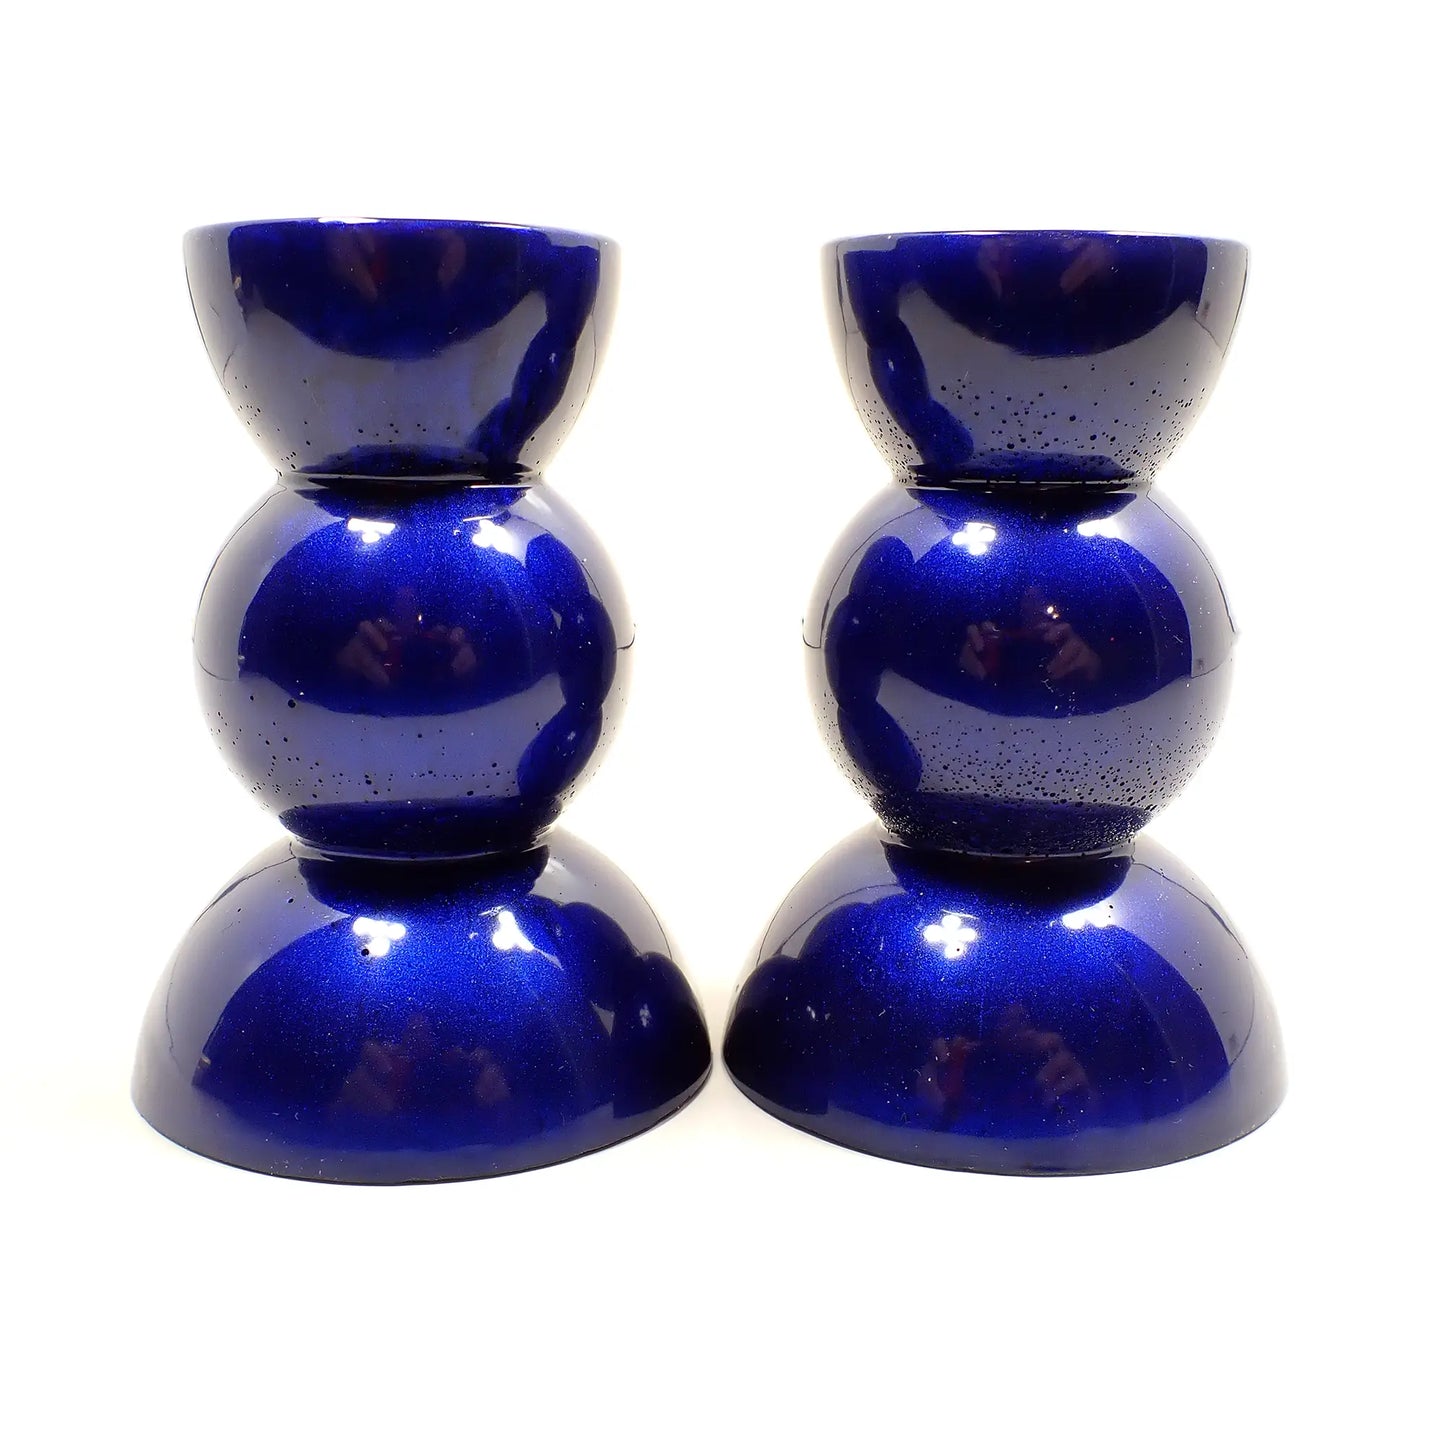 Set of Two Handmade Pearly Cobalt Blue Resin Rounded Geometric Candlestick Holders